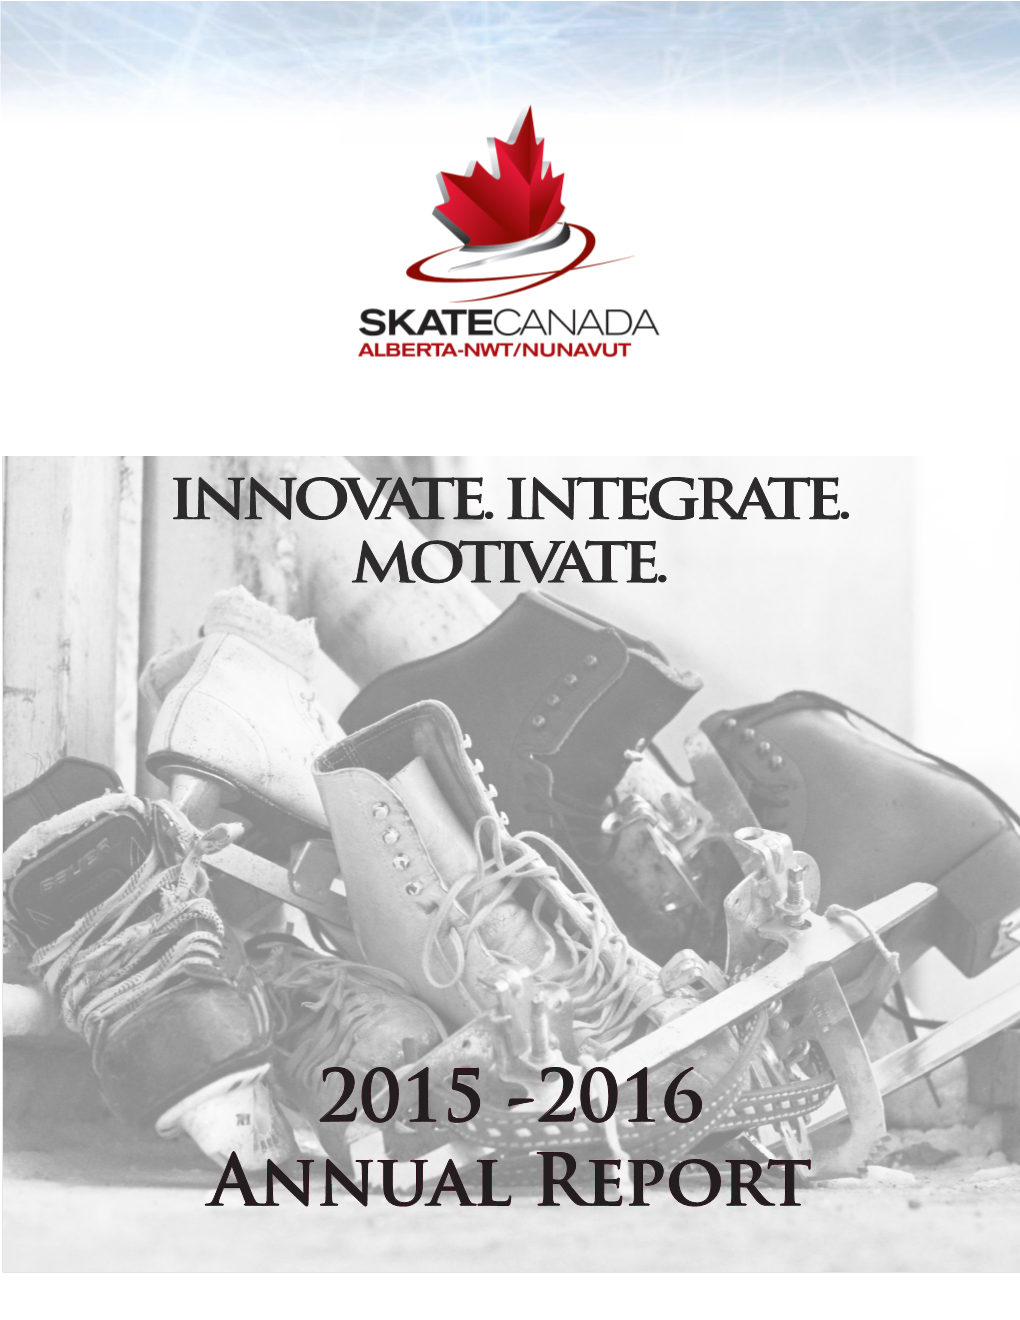 2015 -2016 Annual Report Inspiring All Canadians to Embrace the Joy of Skating Chair’S Message Dear Members of Skate Canada: Alberta-NWT/Nunavut